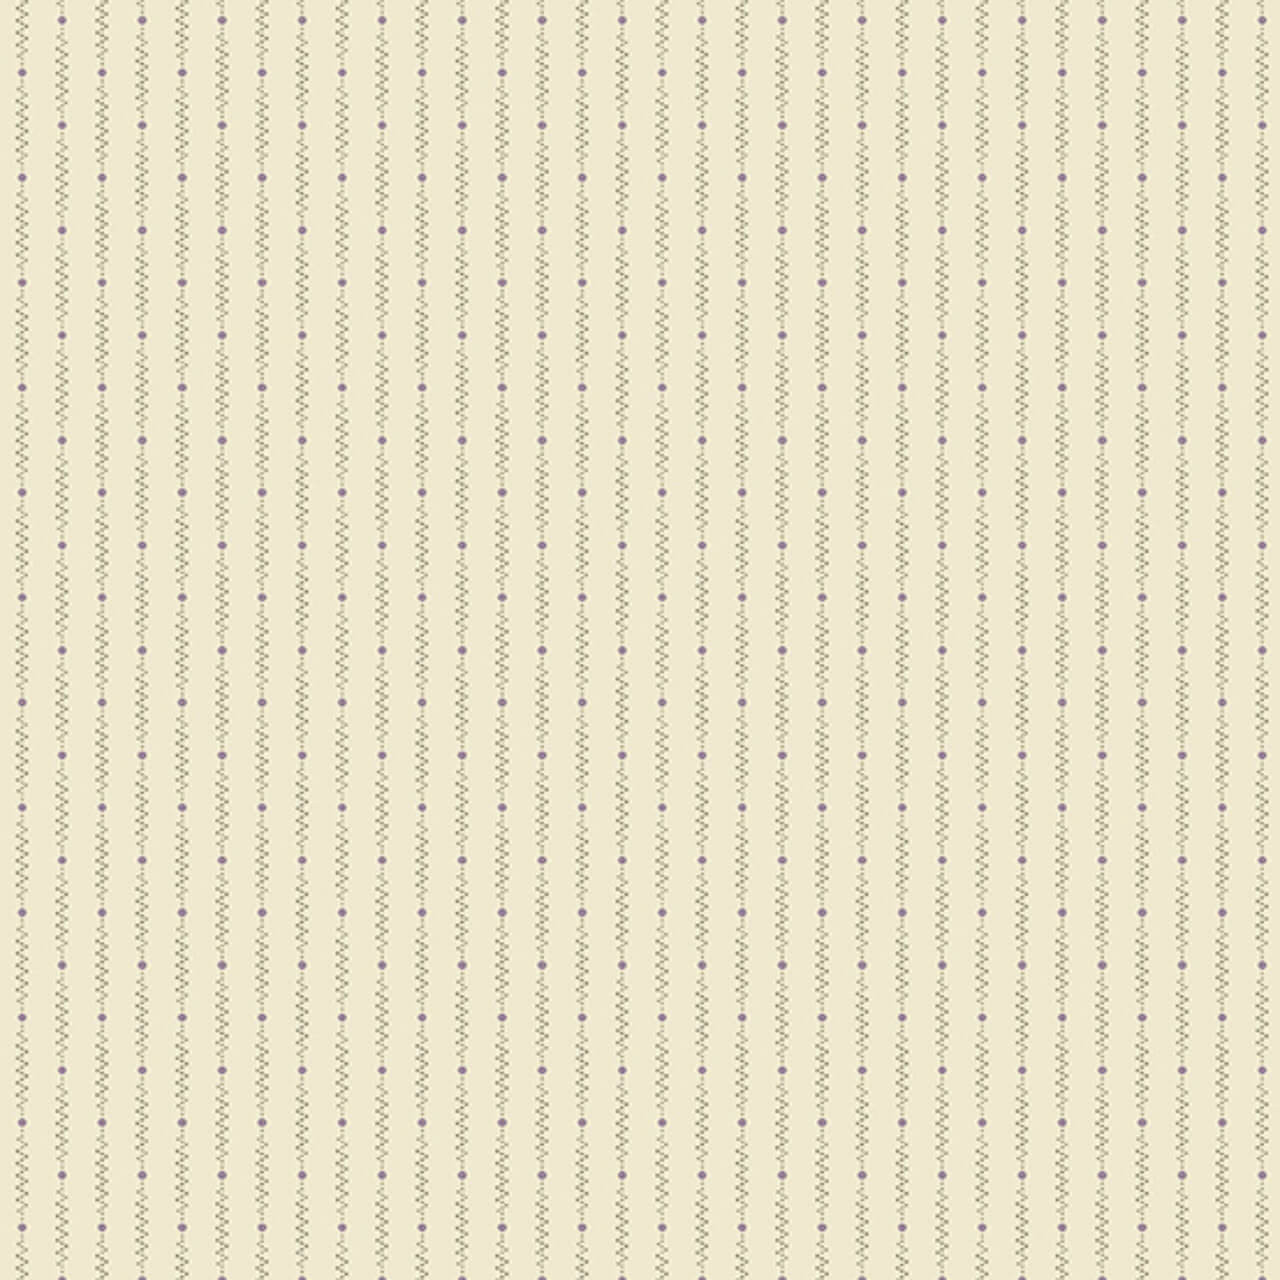 Andover Fabrics' 'Dot Zipper in Ivory' from the Jewel Box collection, showcasing a delicate dotted line pattern on a cream background.